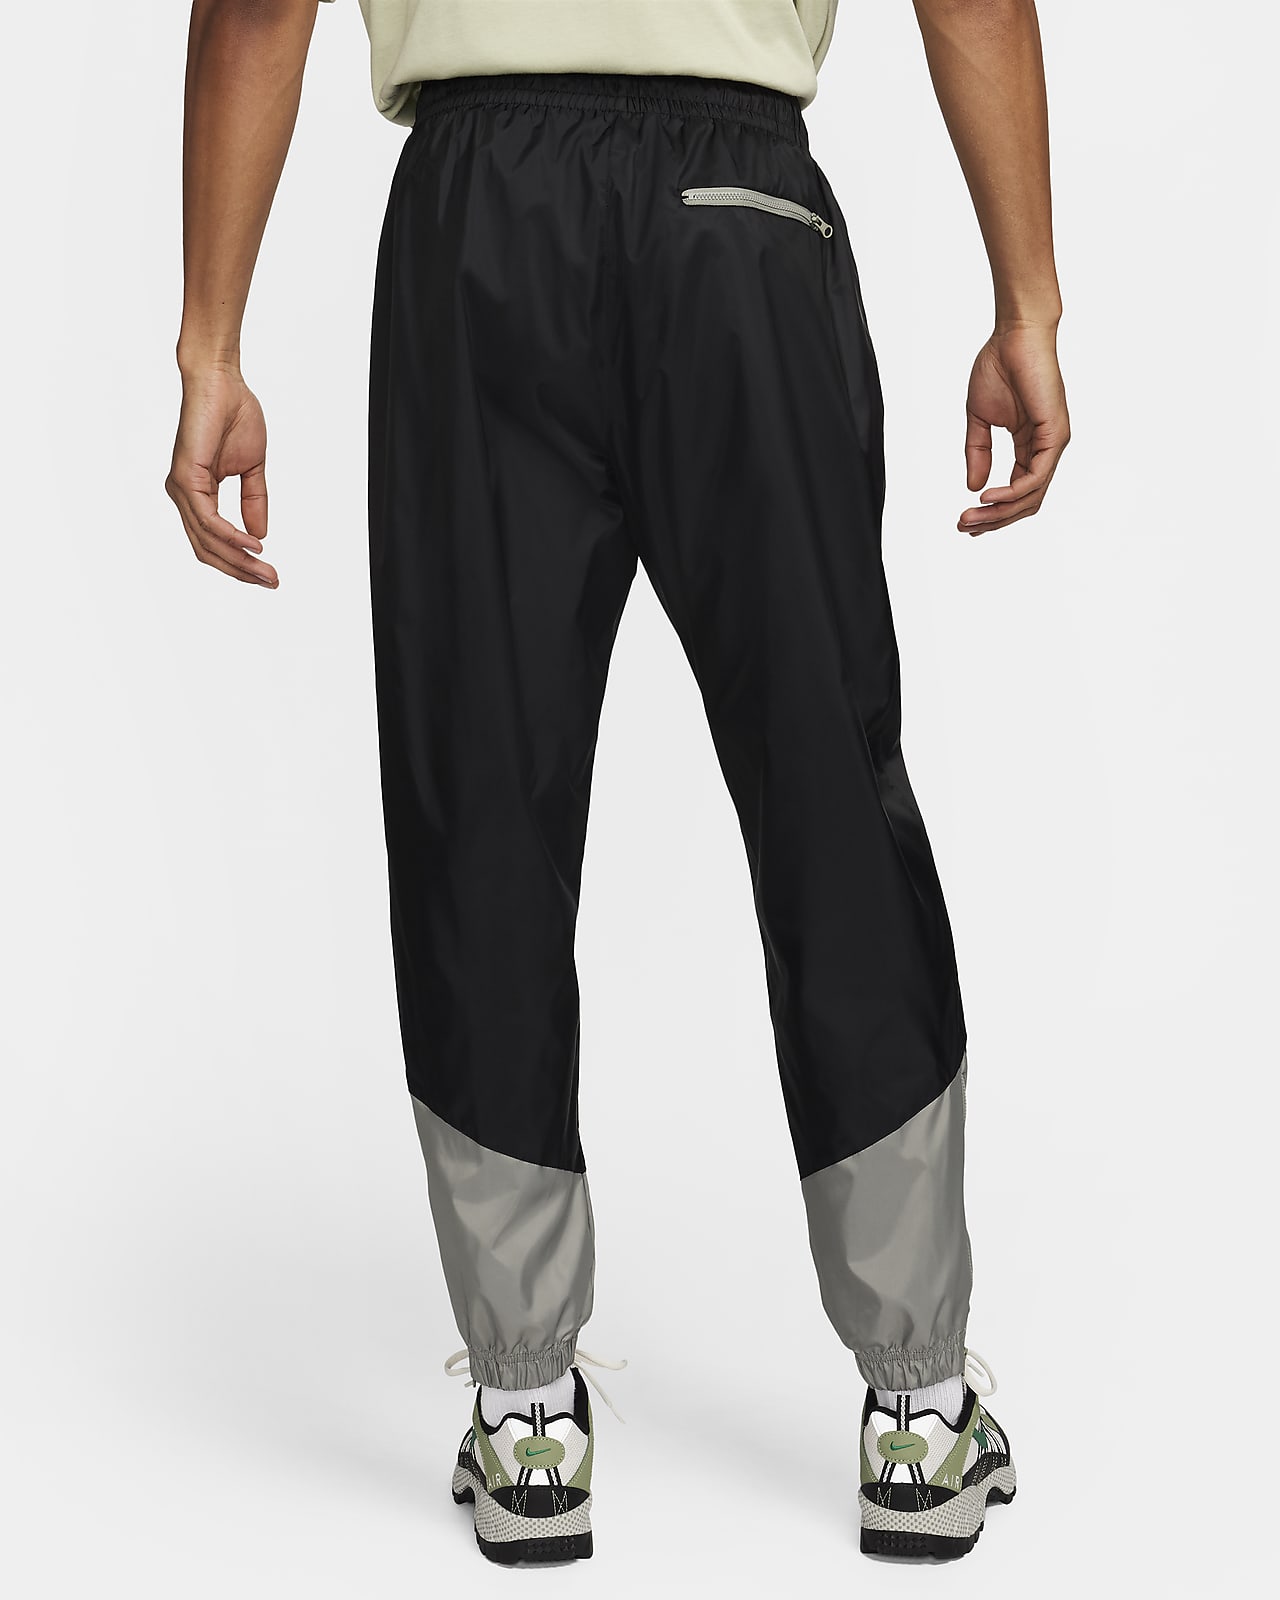 Under Armor track pants in 2023  Clothes design, Track pants